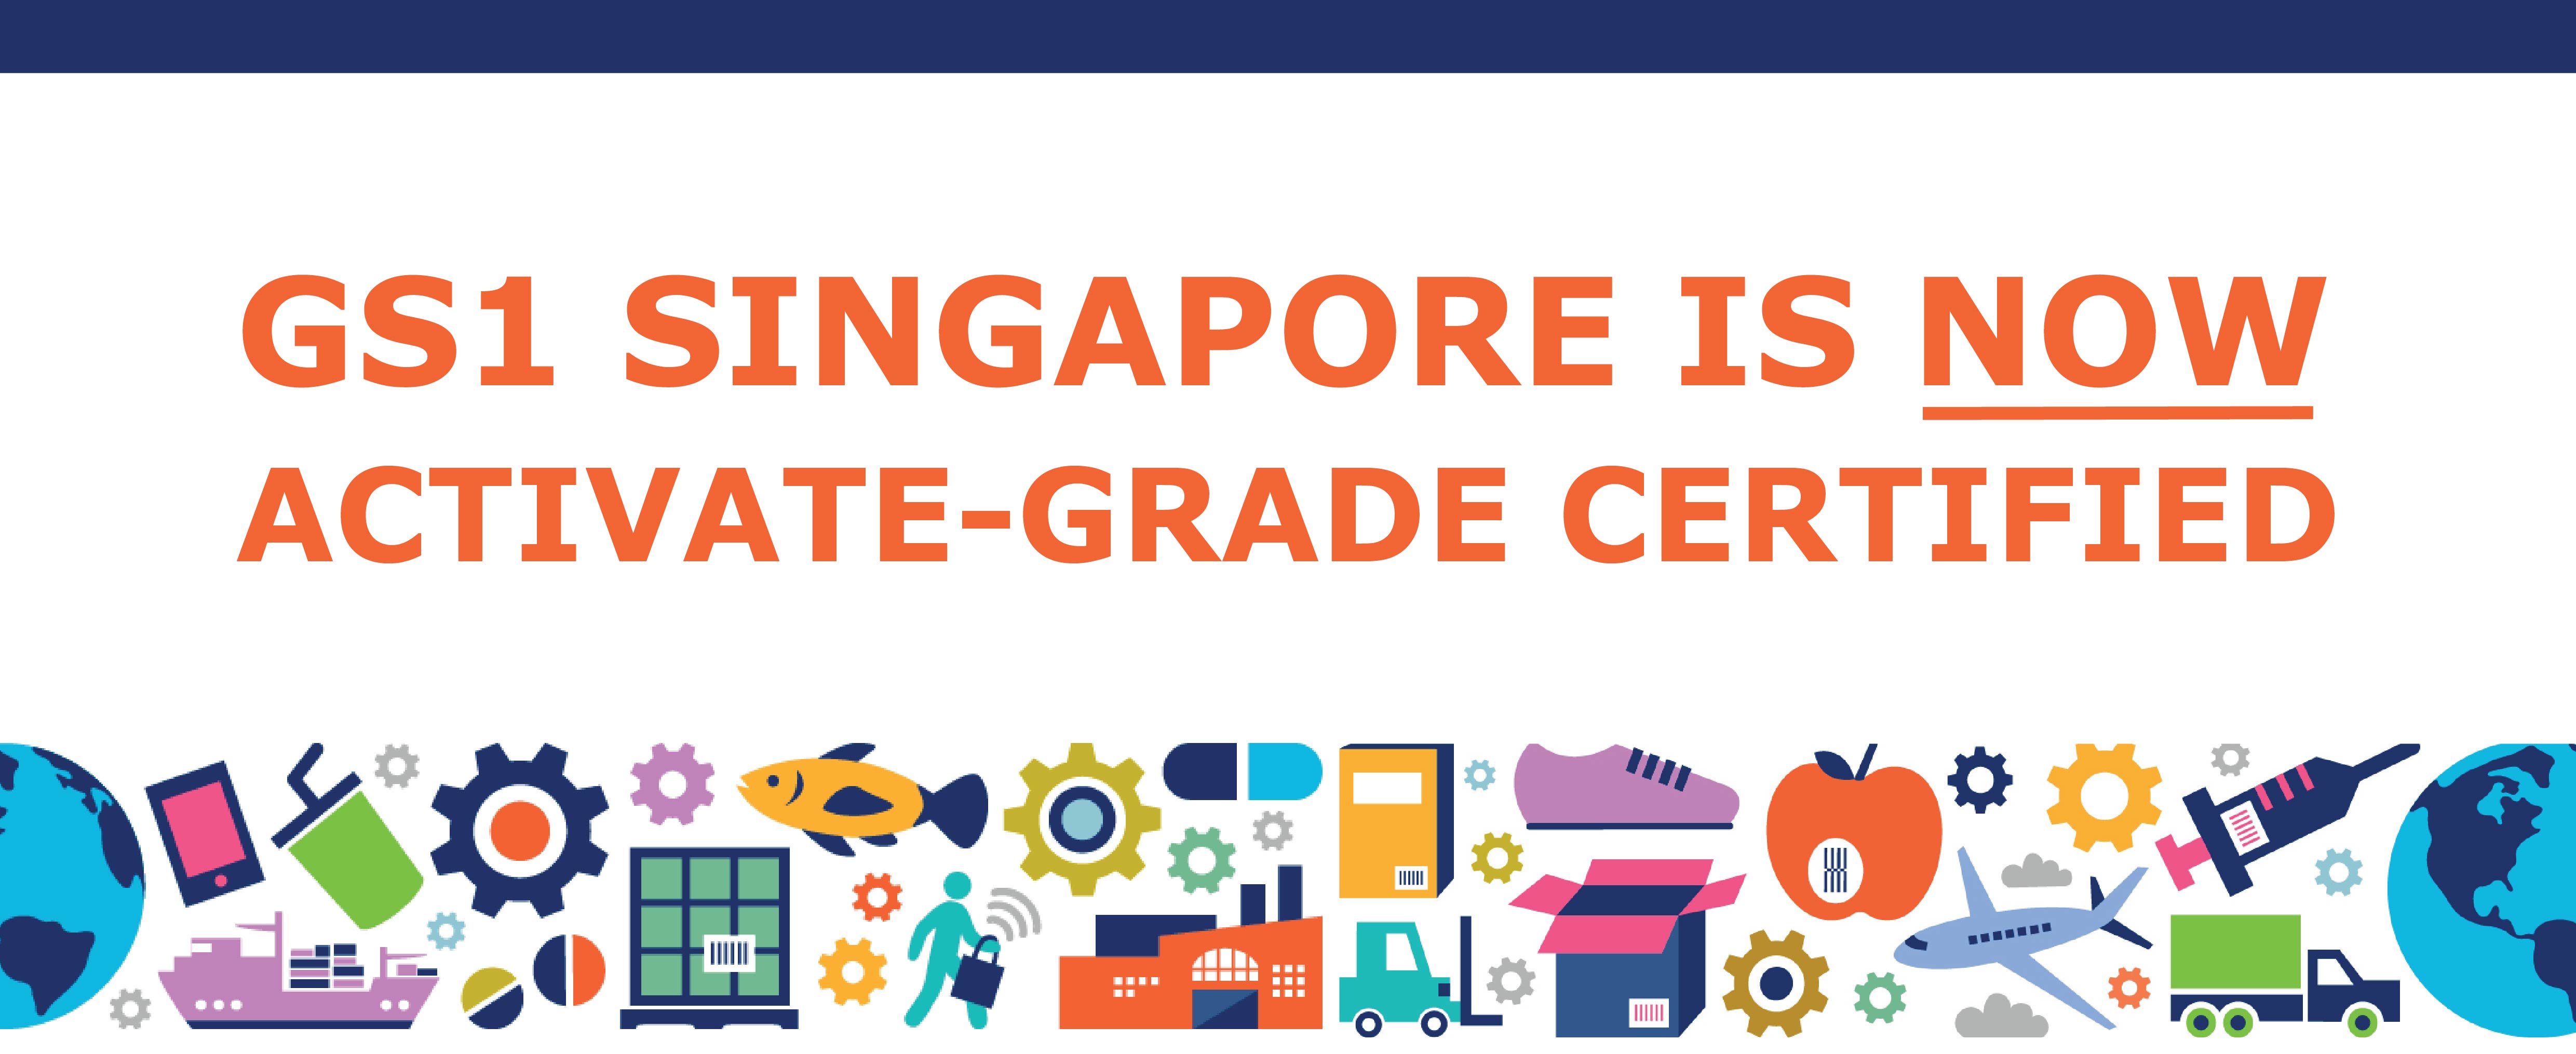 GS1 Singapore is now Activate-grade certified